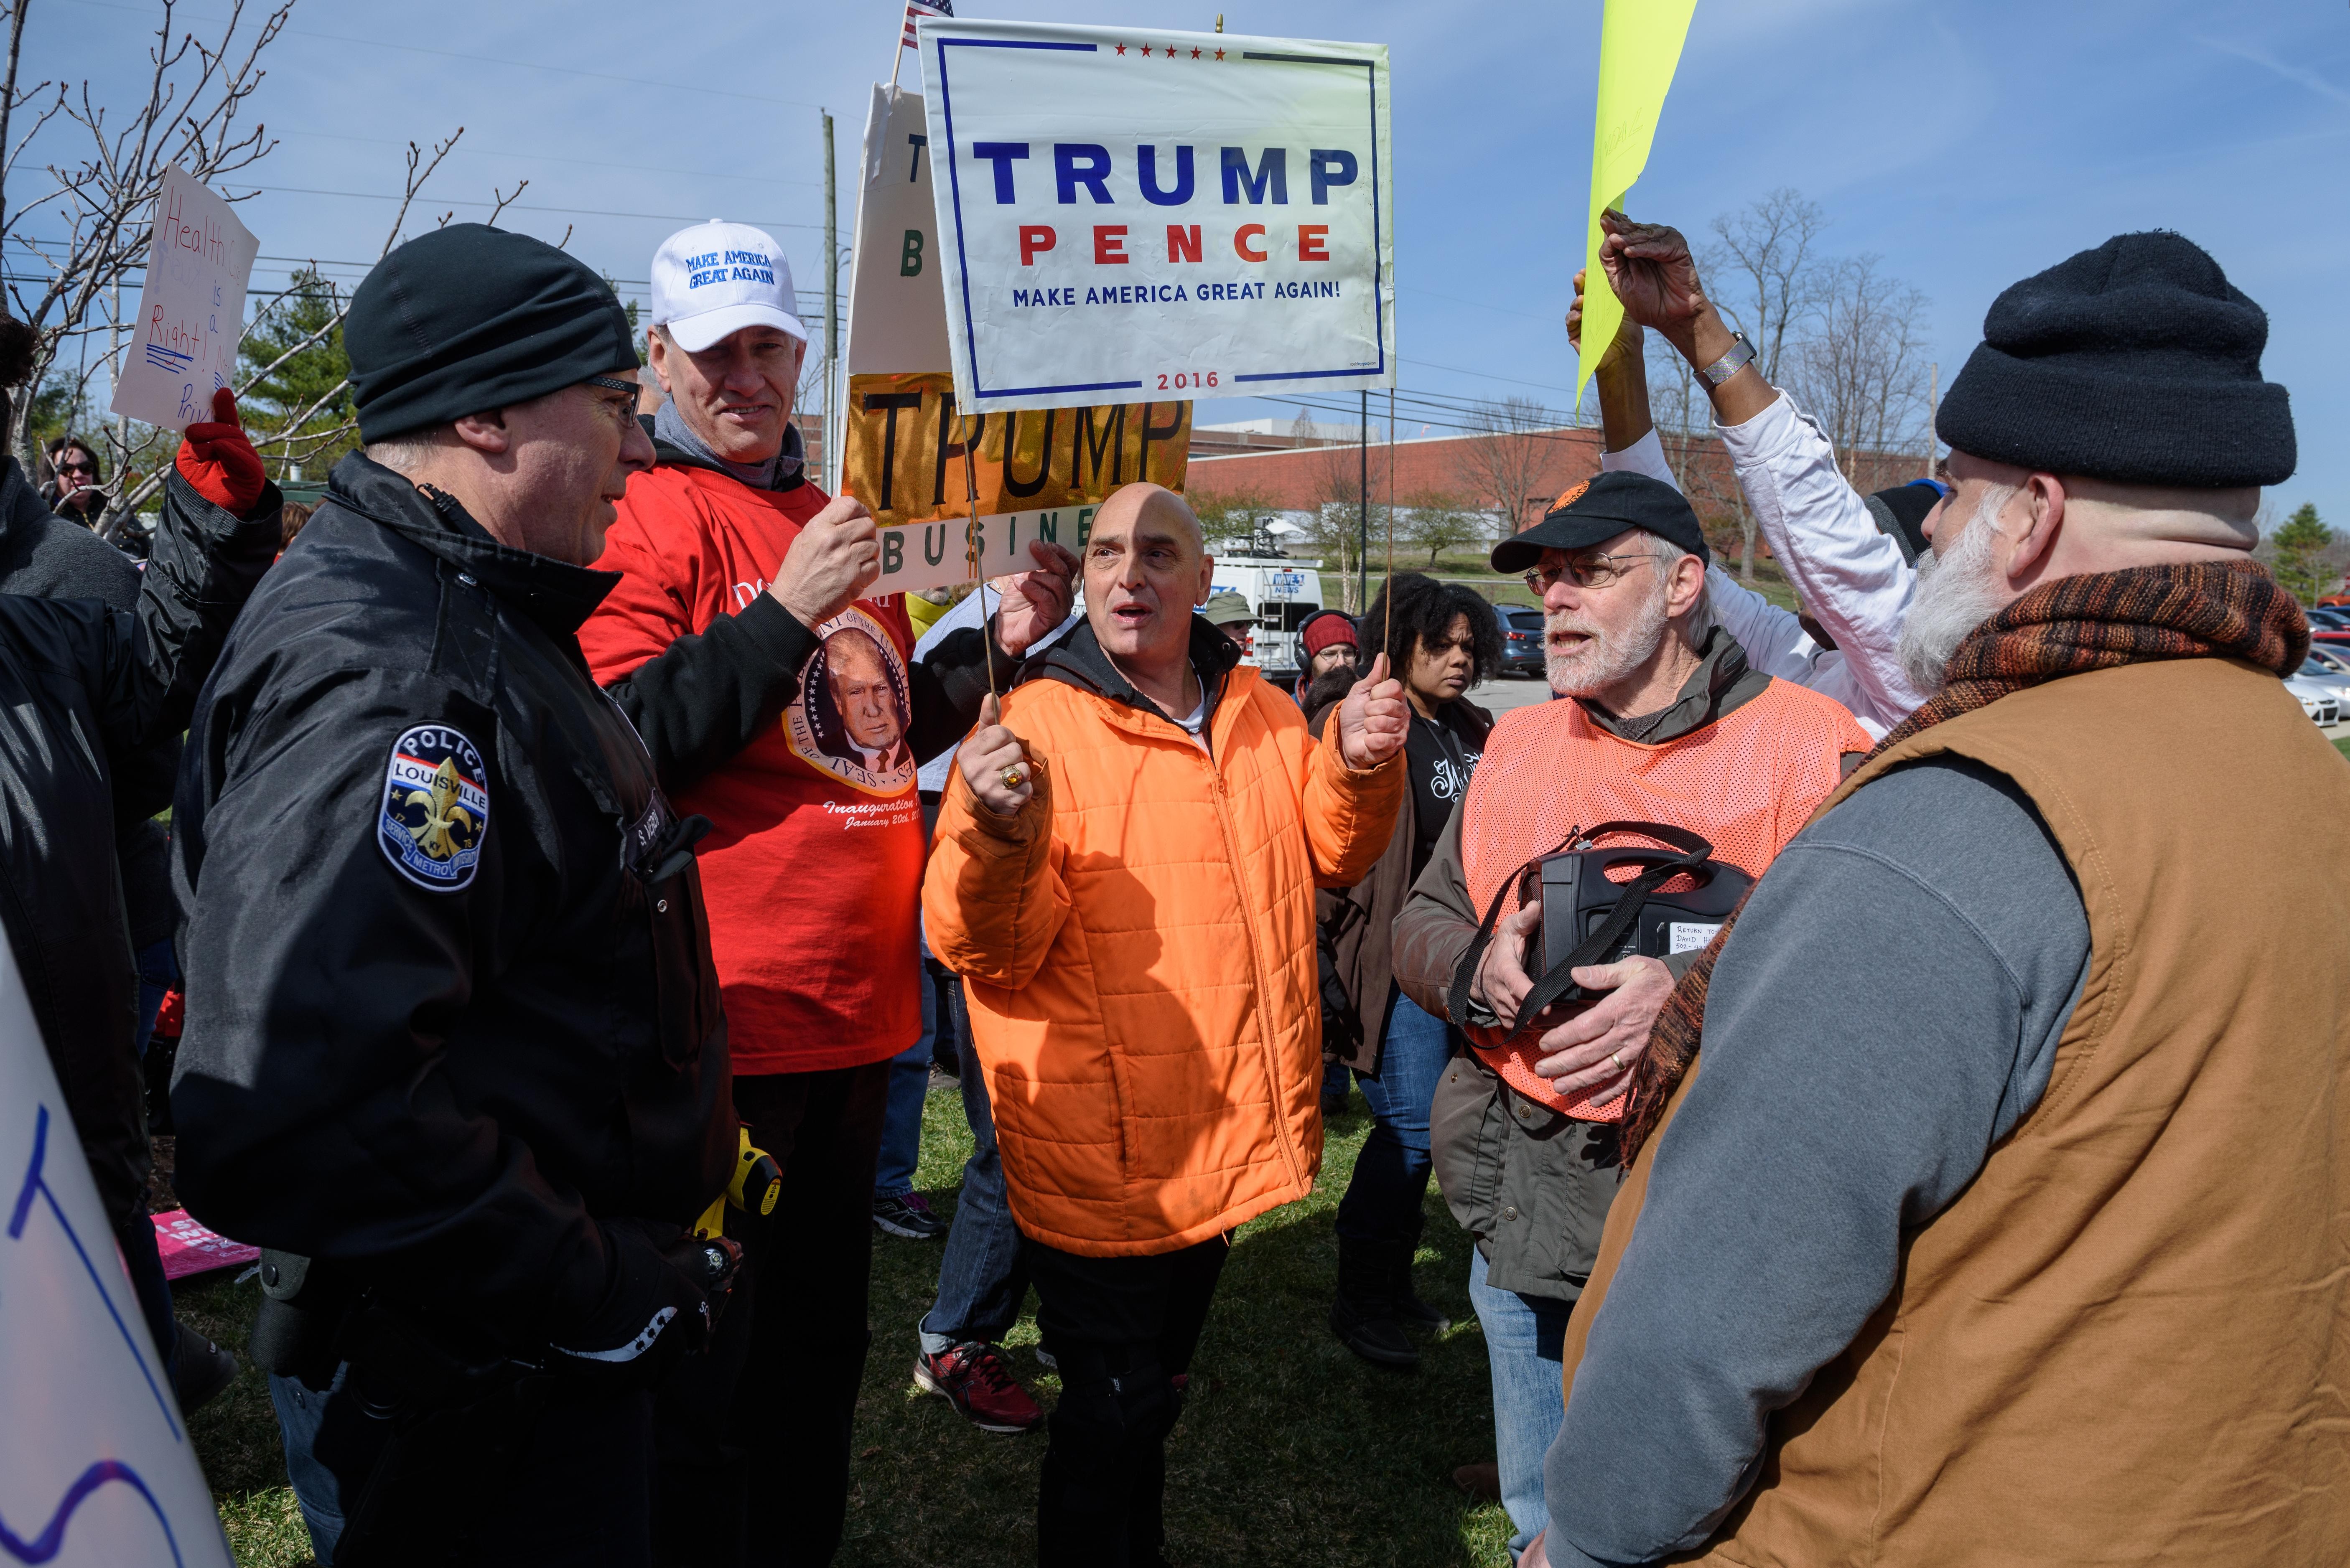 A warm-up for President Trump's visit next Monday, the people behind Saturday's protest against VP Pence and Gov. Bevin